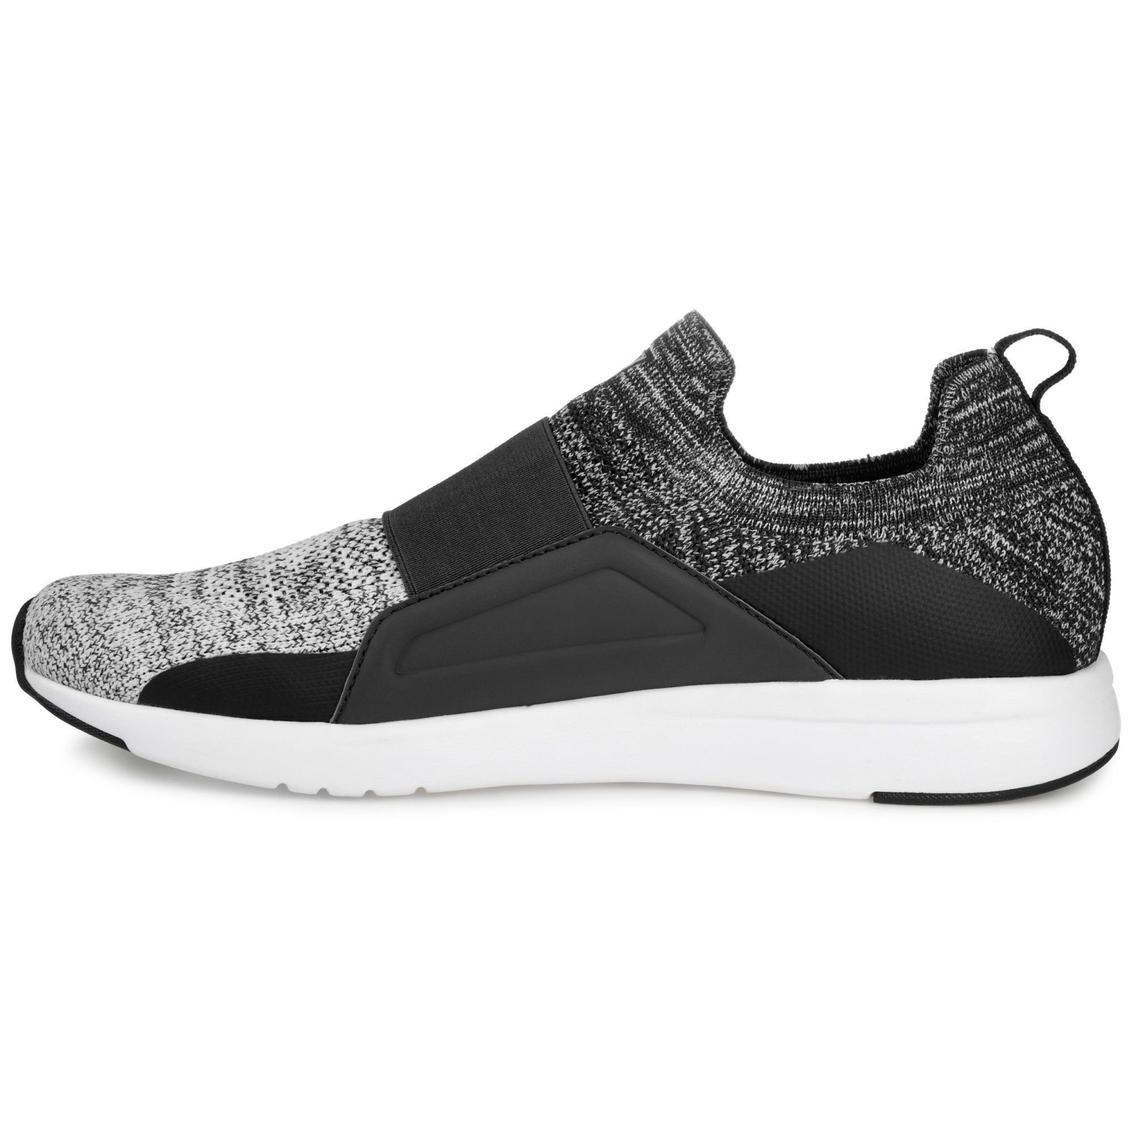 Vance Co. Cannon Casual Slip-on Knit Walking Sneaker - Image 4 of 4